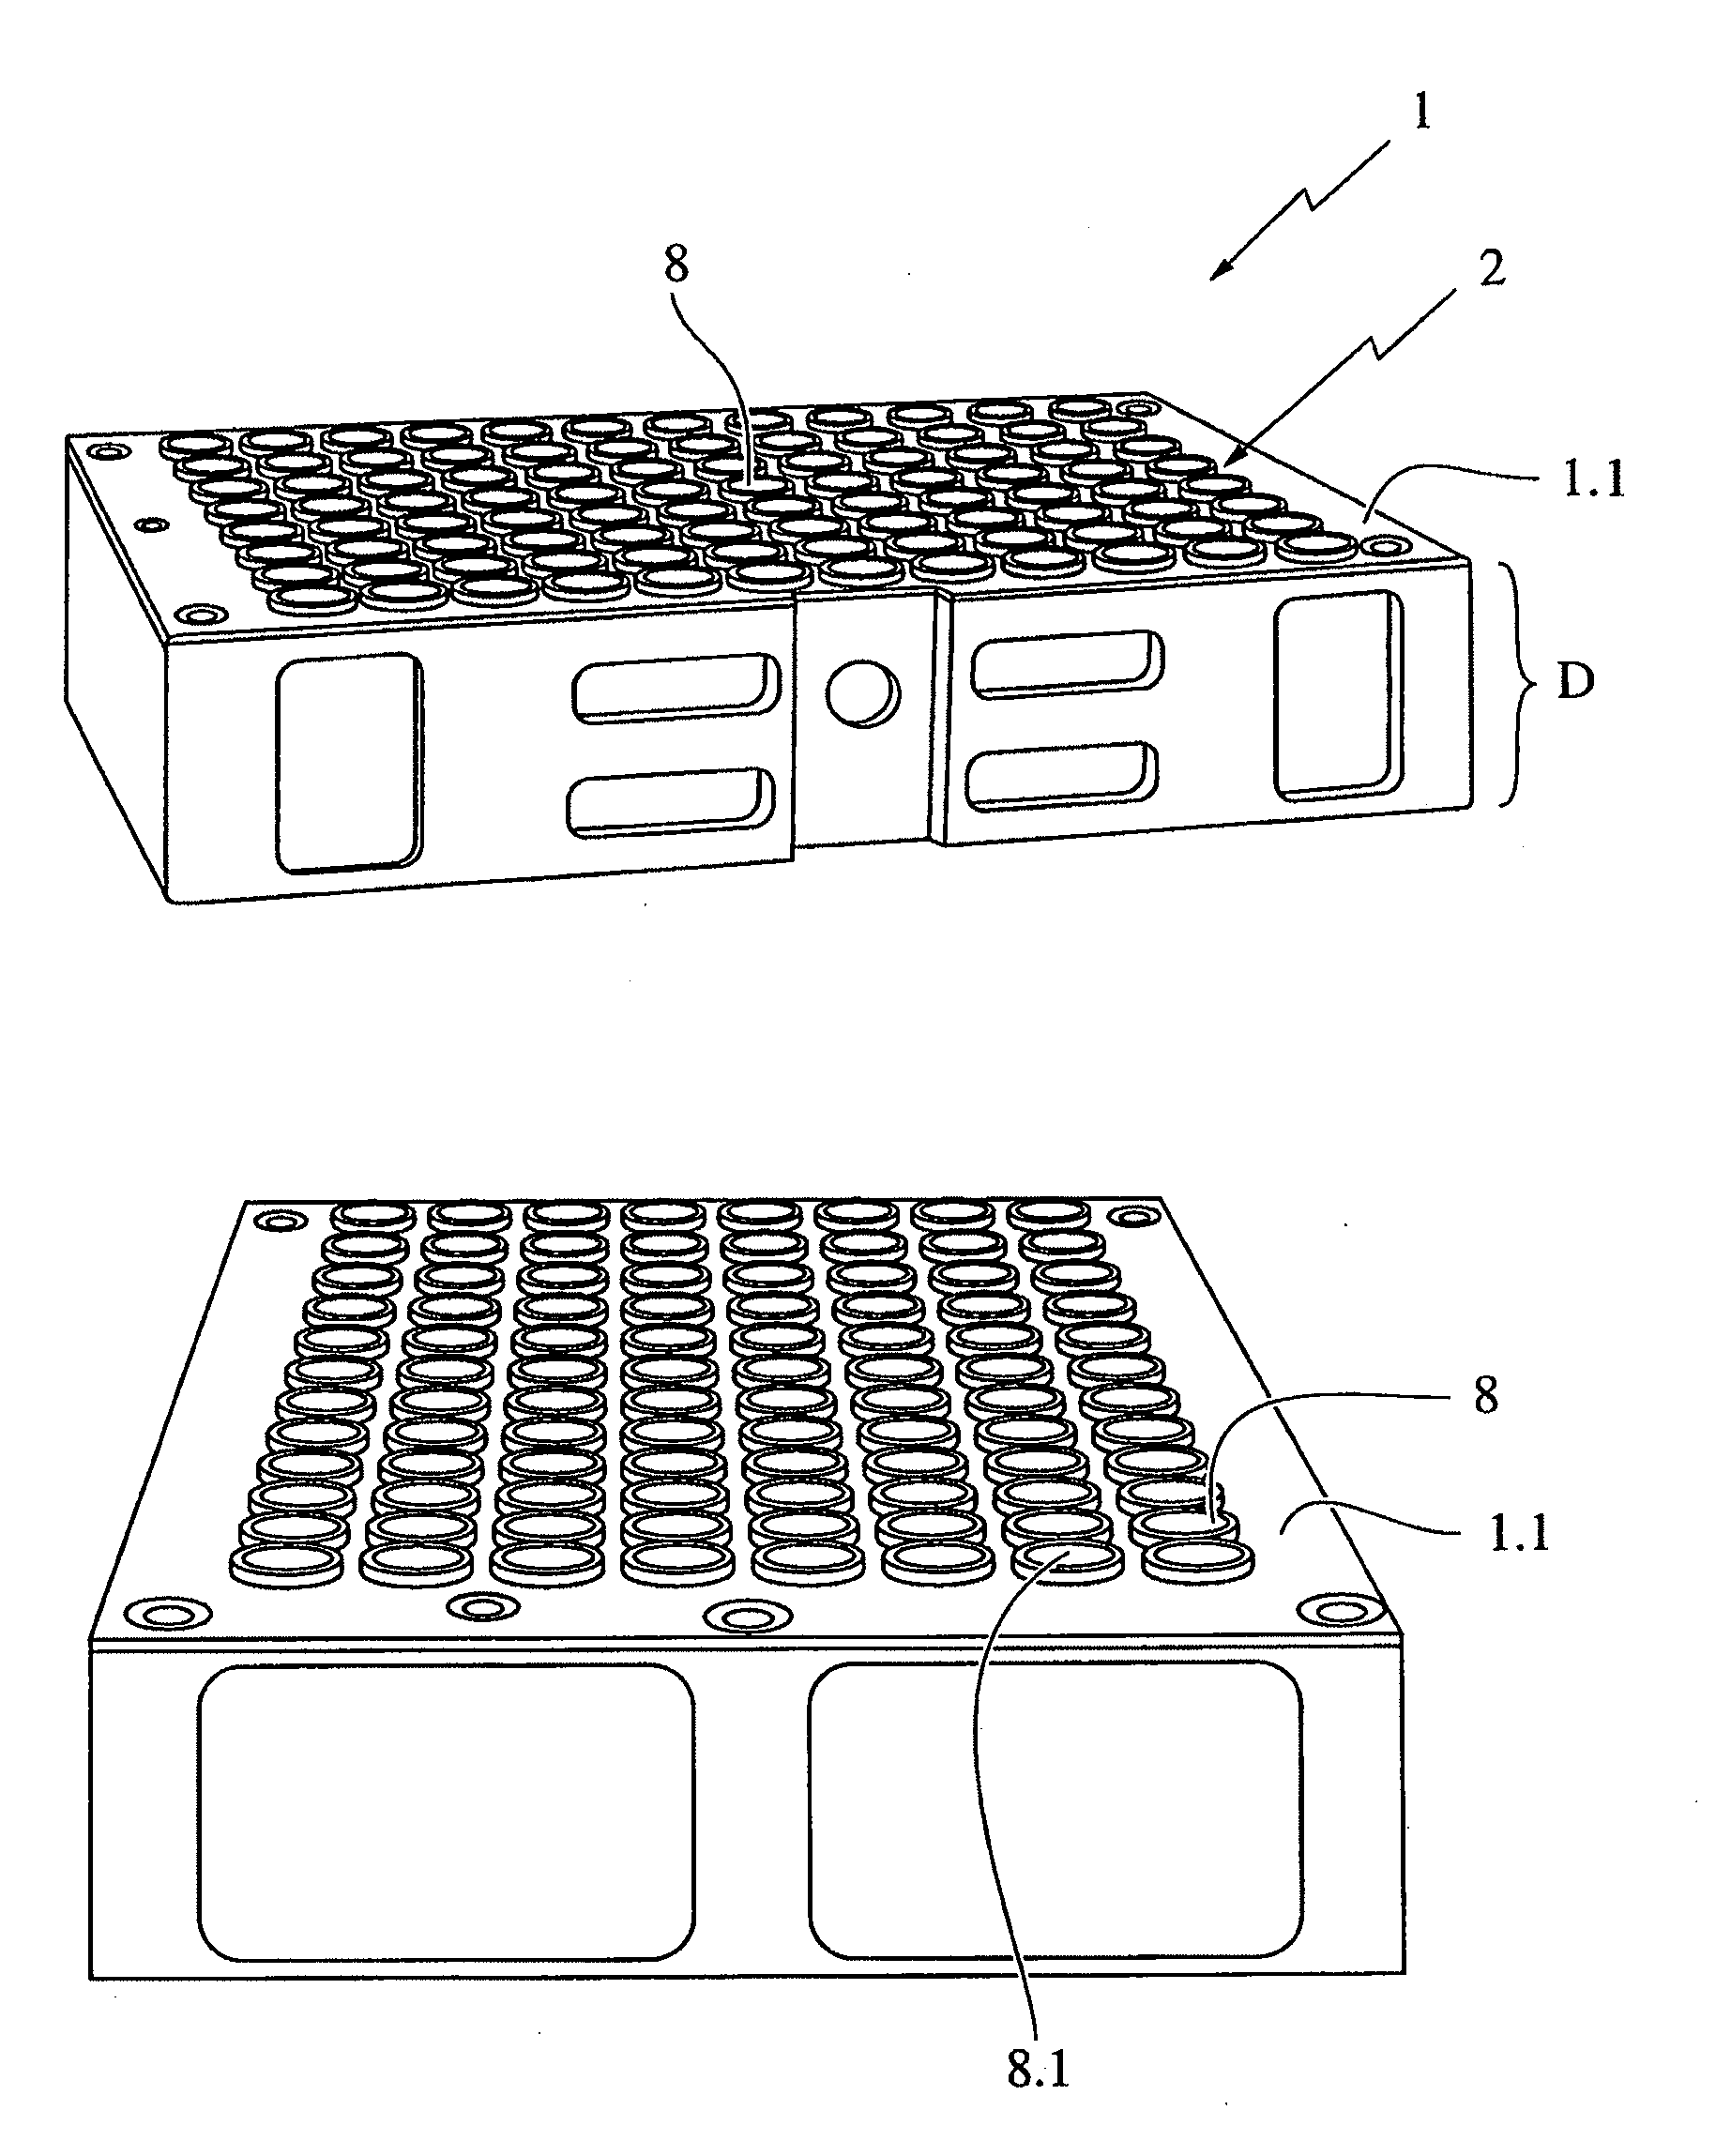 Sample Carrier and Method for Achieving Comparable Analytical Results By Aligning Test Substances on a Uniform Plane